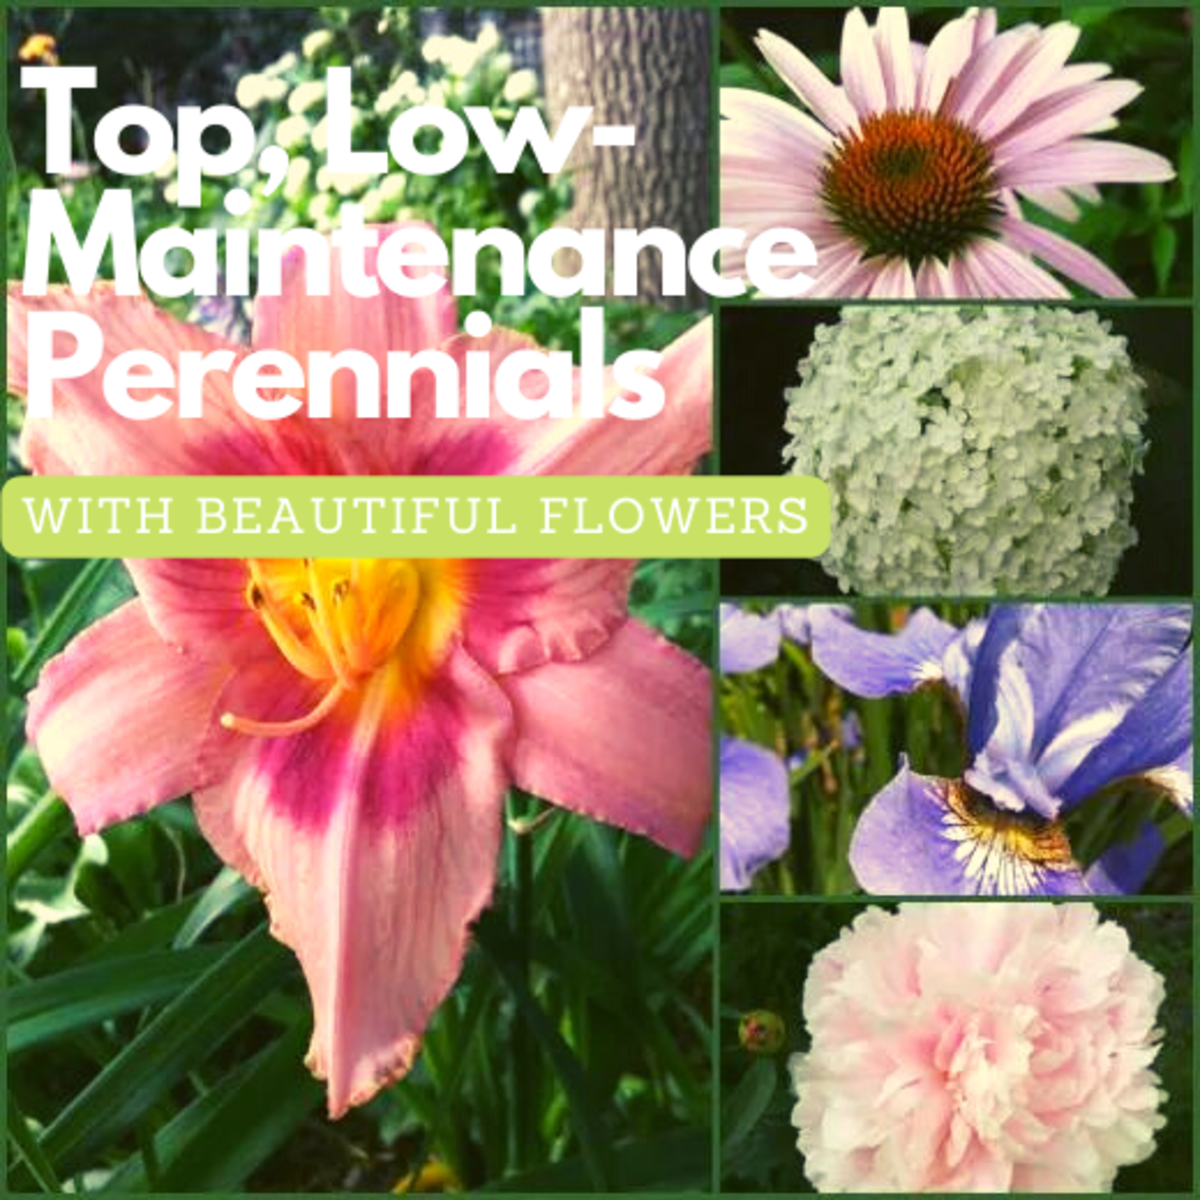 Top Low-Maintenance Perennials With Beautiful Flowers